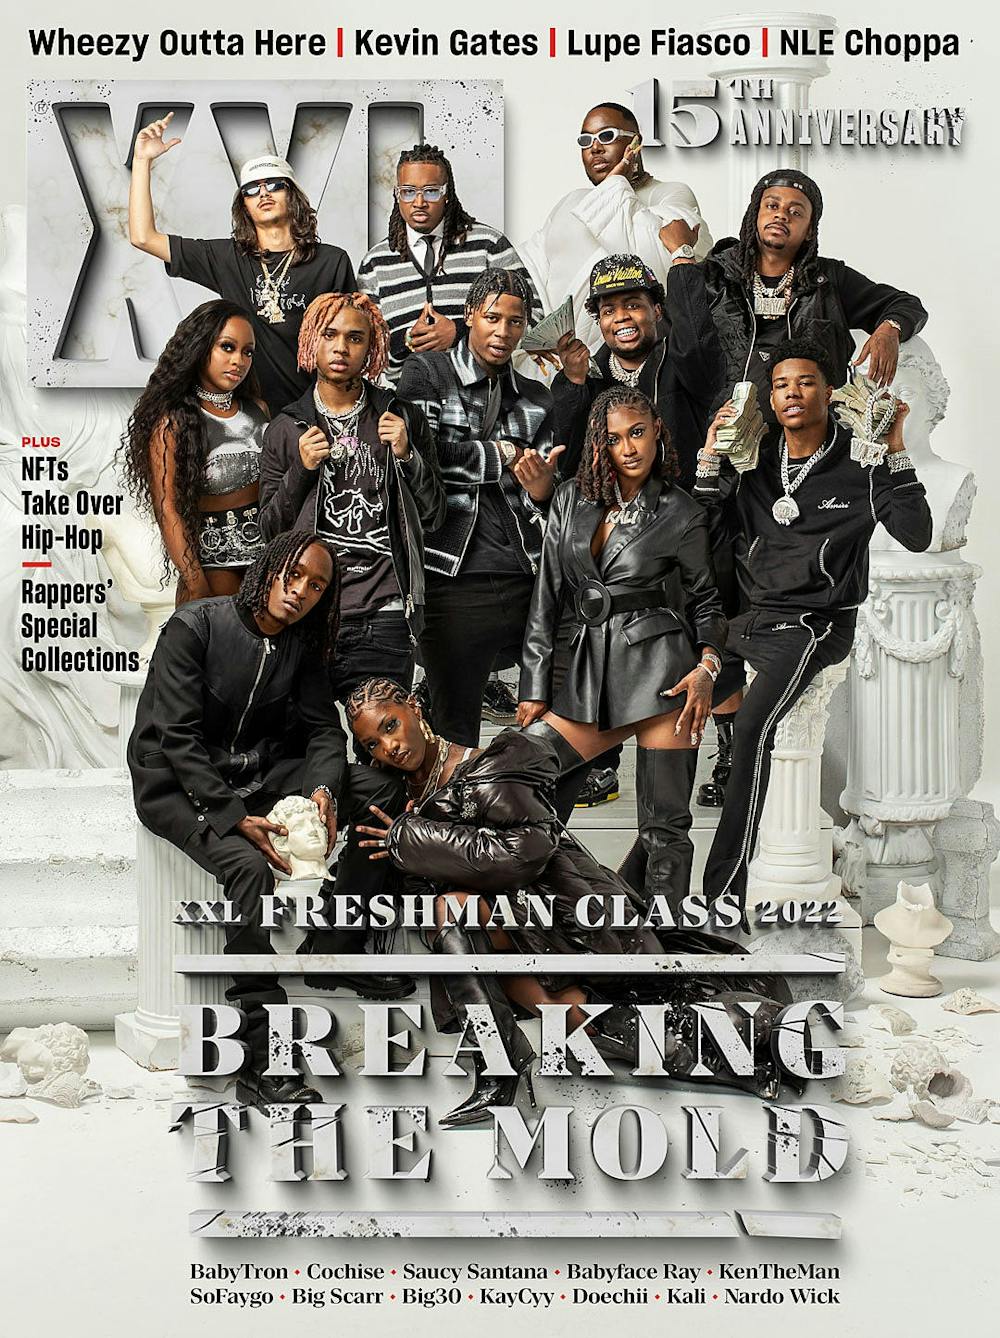 Opinion: The 2022 XXL Freshman just might be one of the most talented classes yet